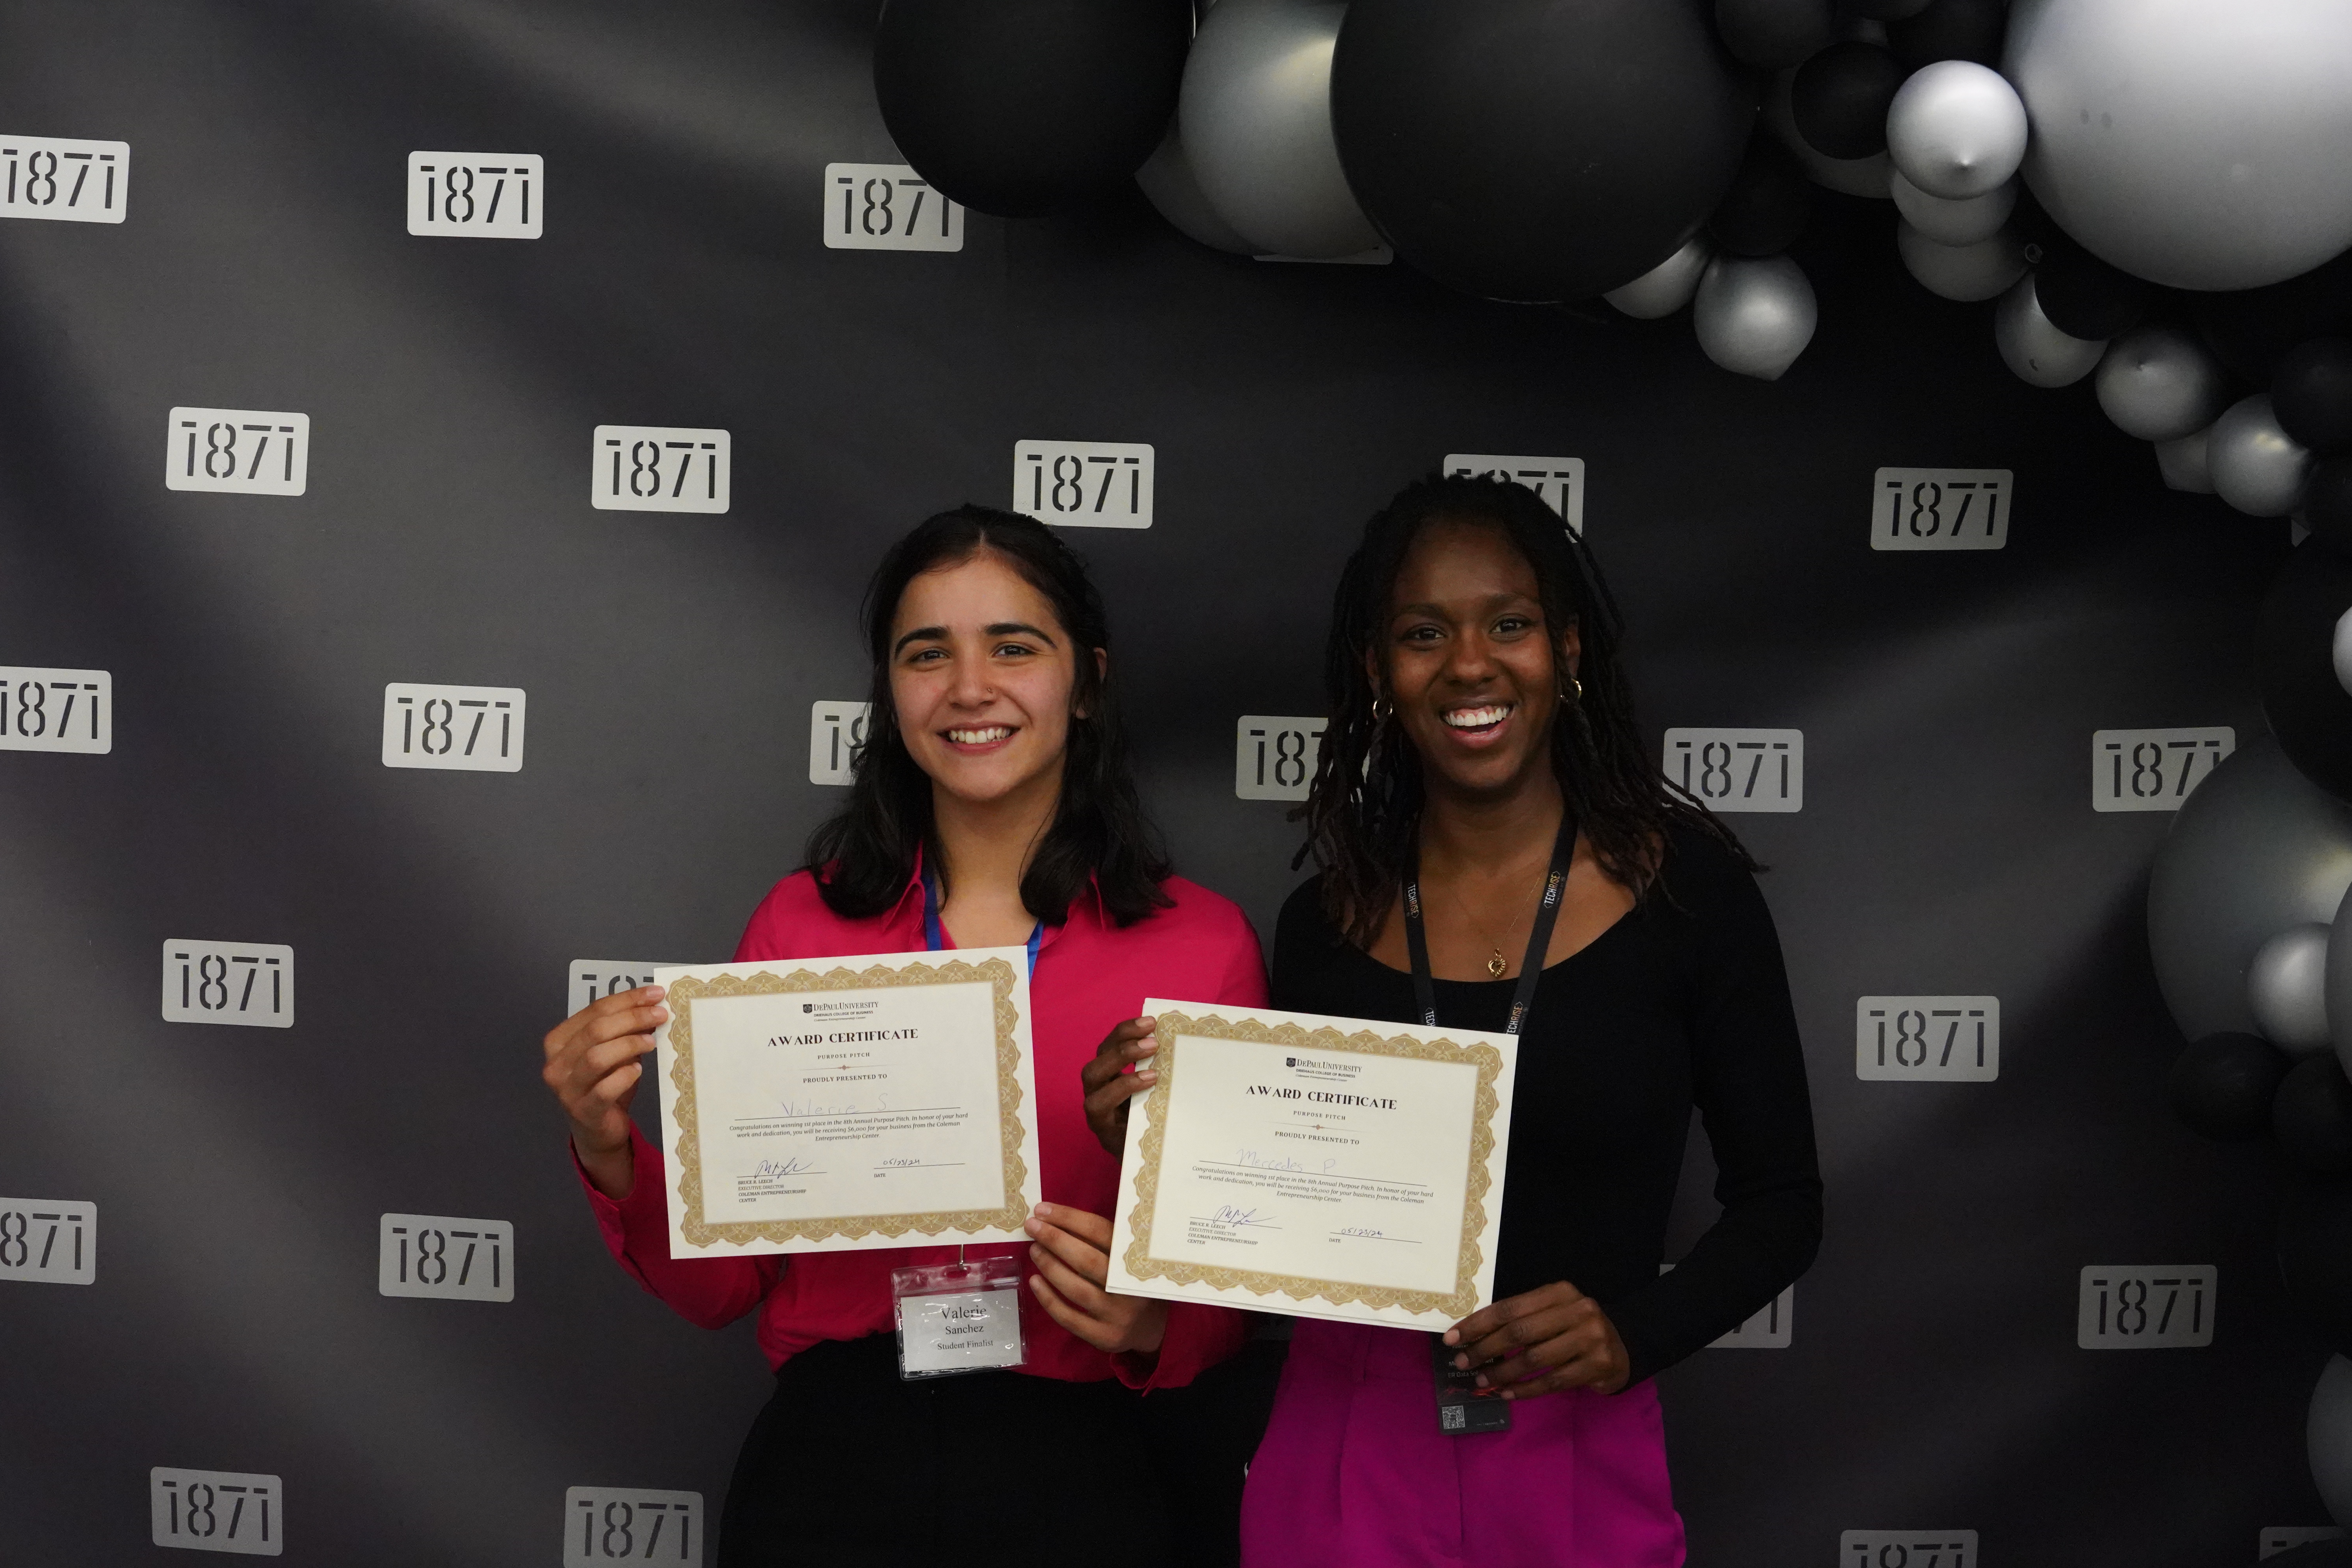 Two women hold up certificates against a black backdrop adorned with balloons